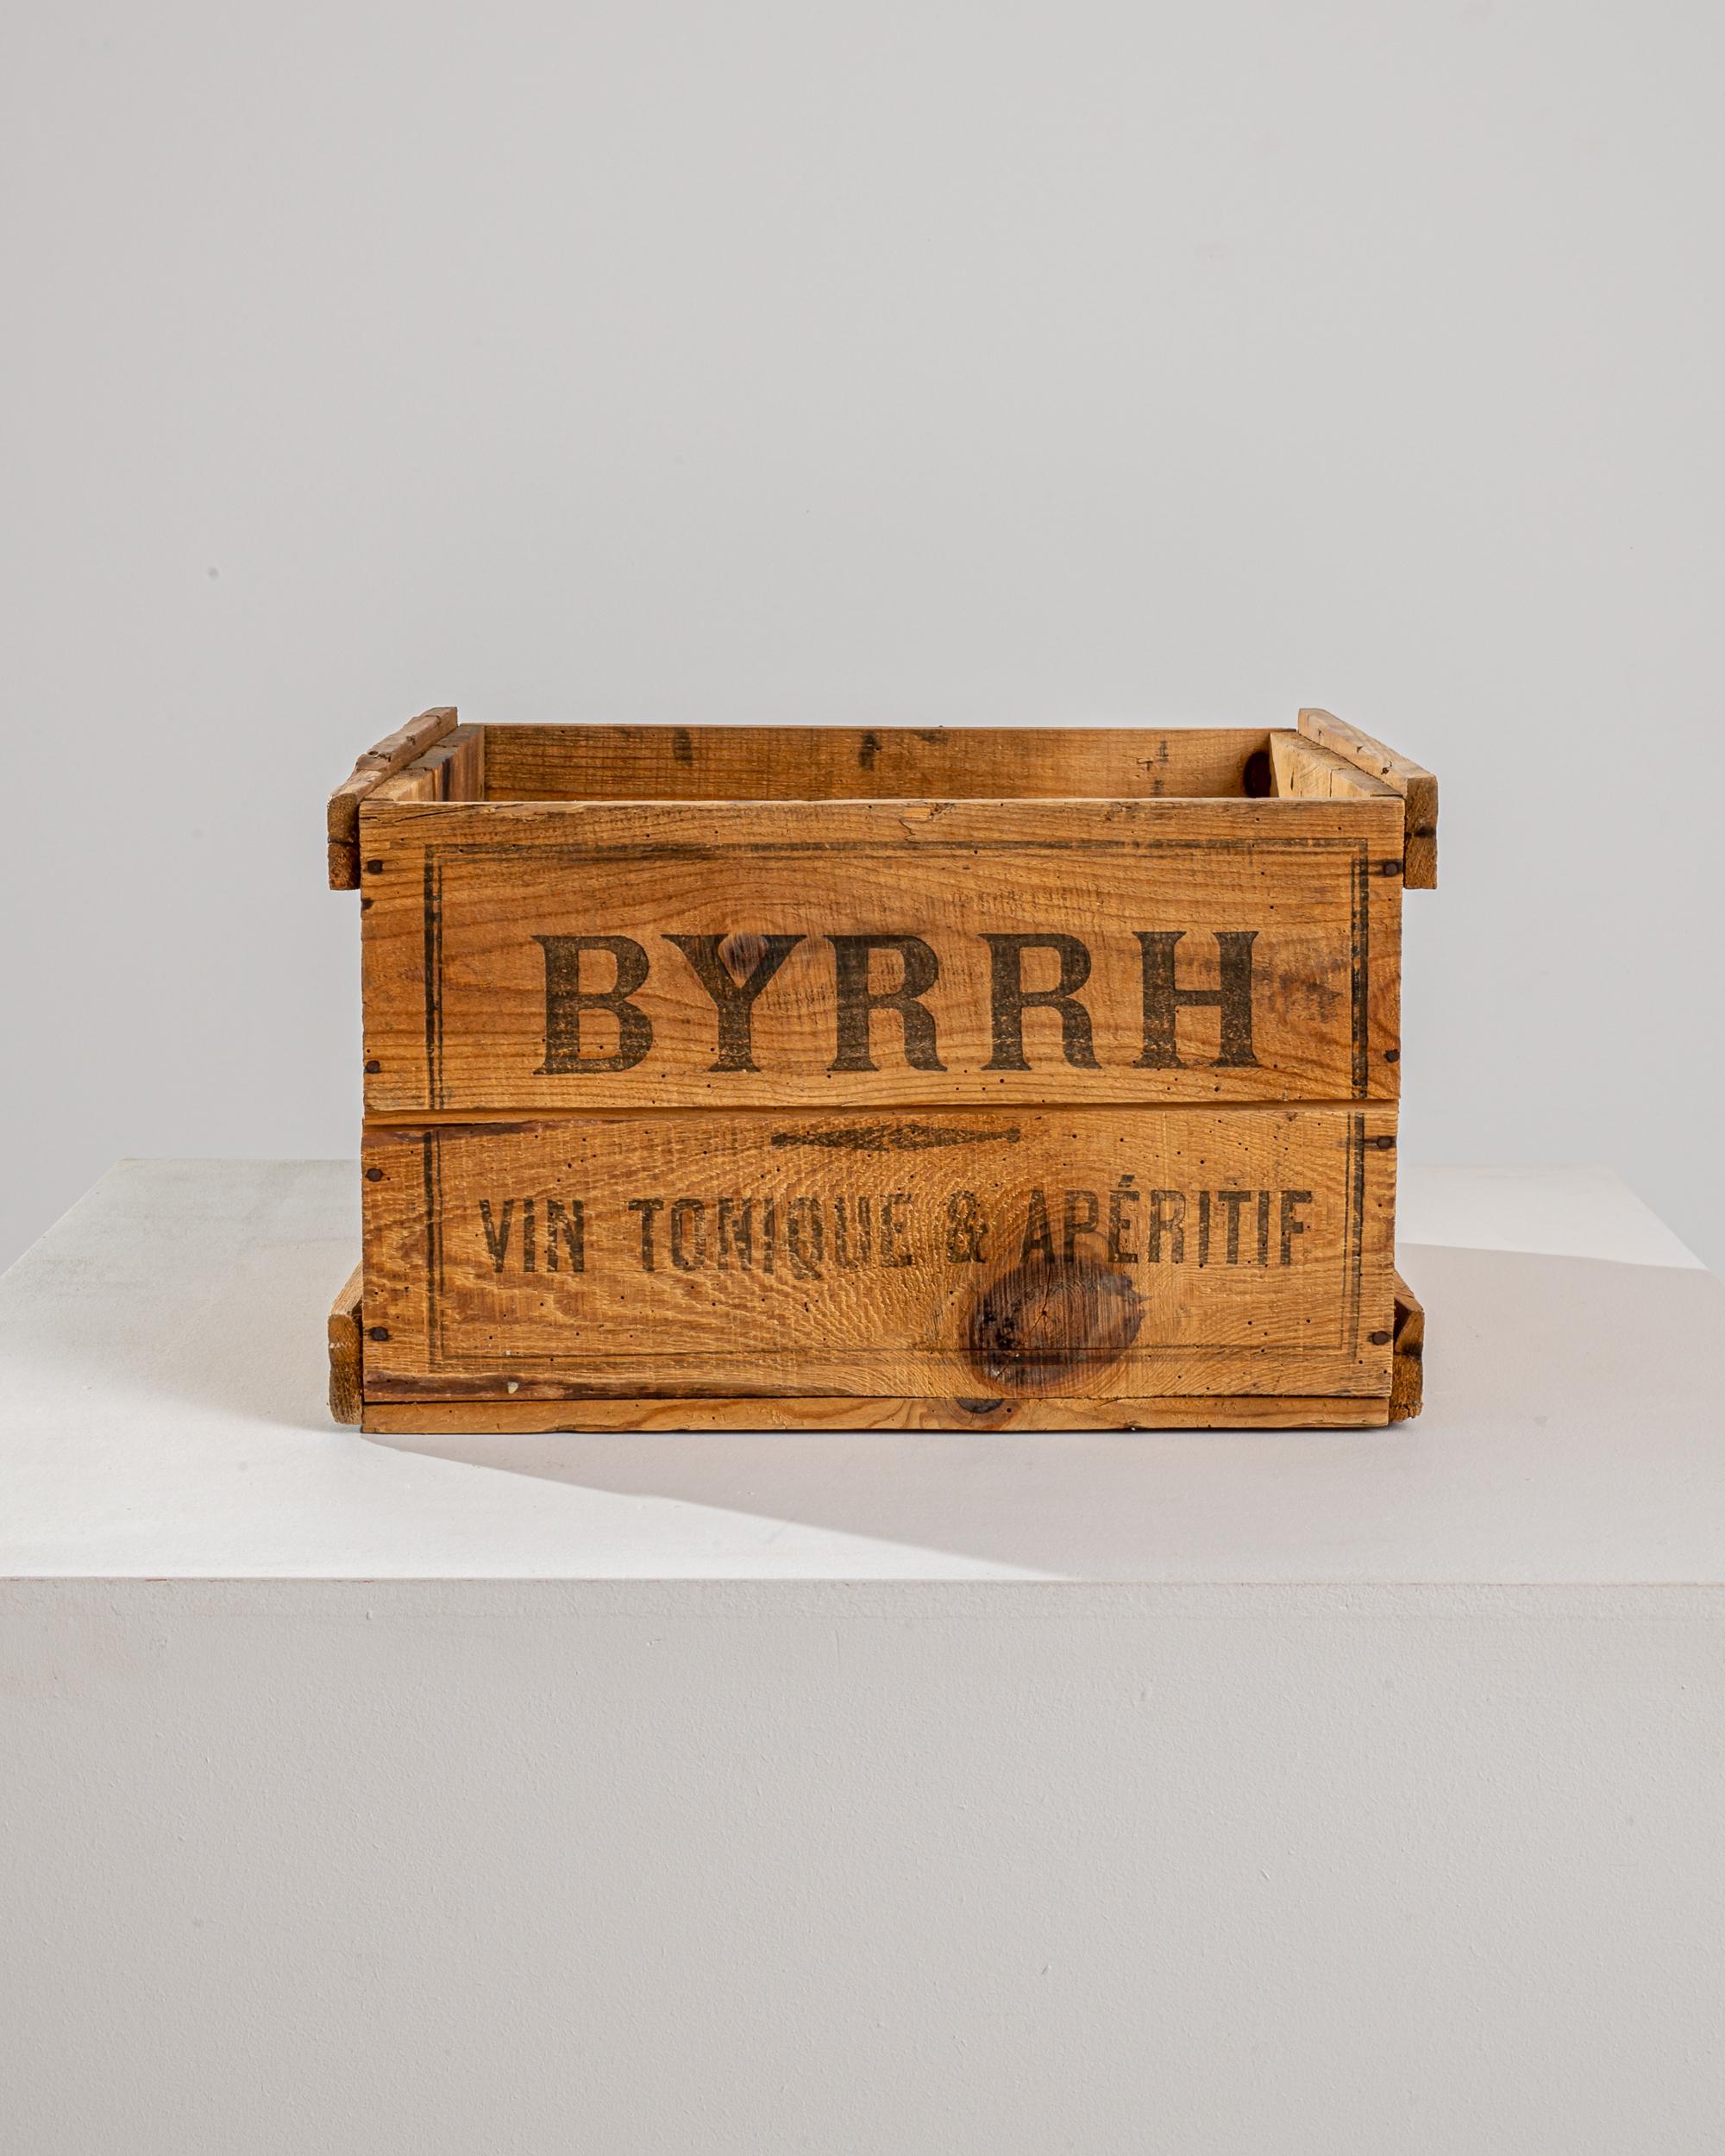 A 20th century wooden box produced in France, originally made to preserve and carefully transport Byrrh bottles, a traditional french apéritif made of red wine, mistelle, and quinine created in 1866 in Thuir, Pyrénées-Orientales. Made of a sturdy